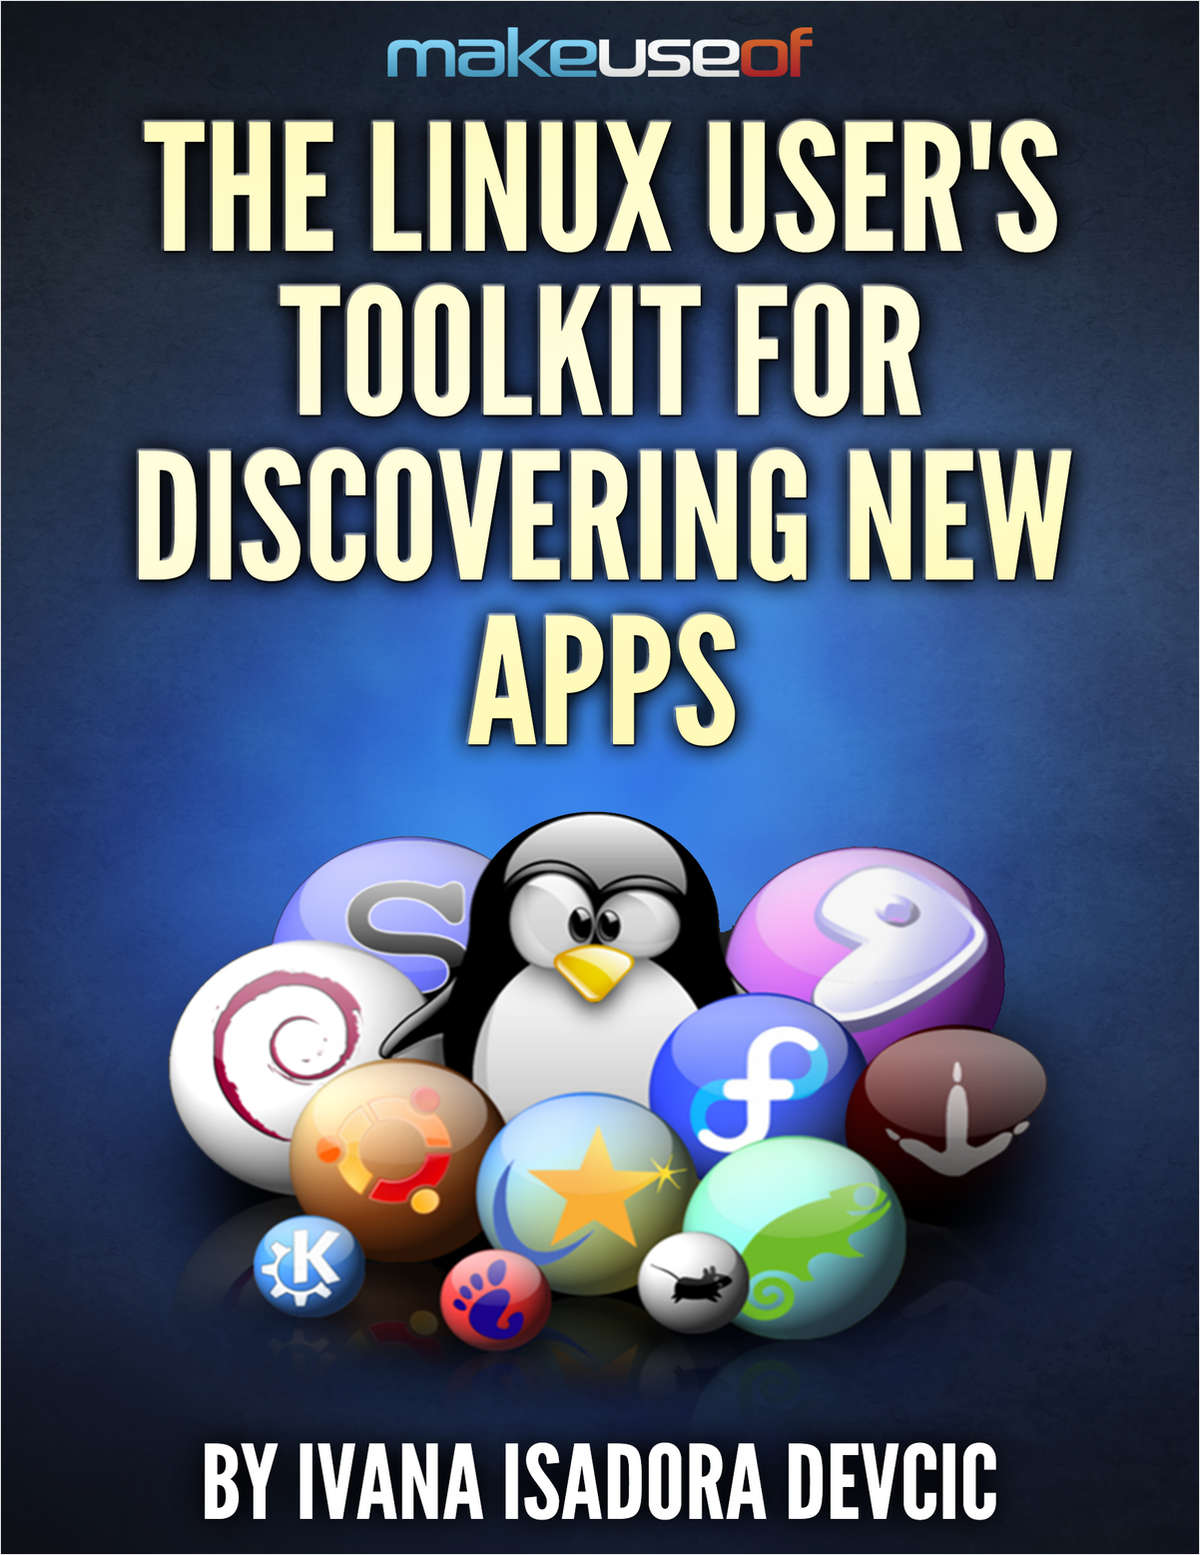 The Linux User's Toolkit for Discovering New Apps